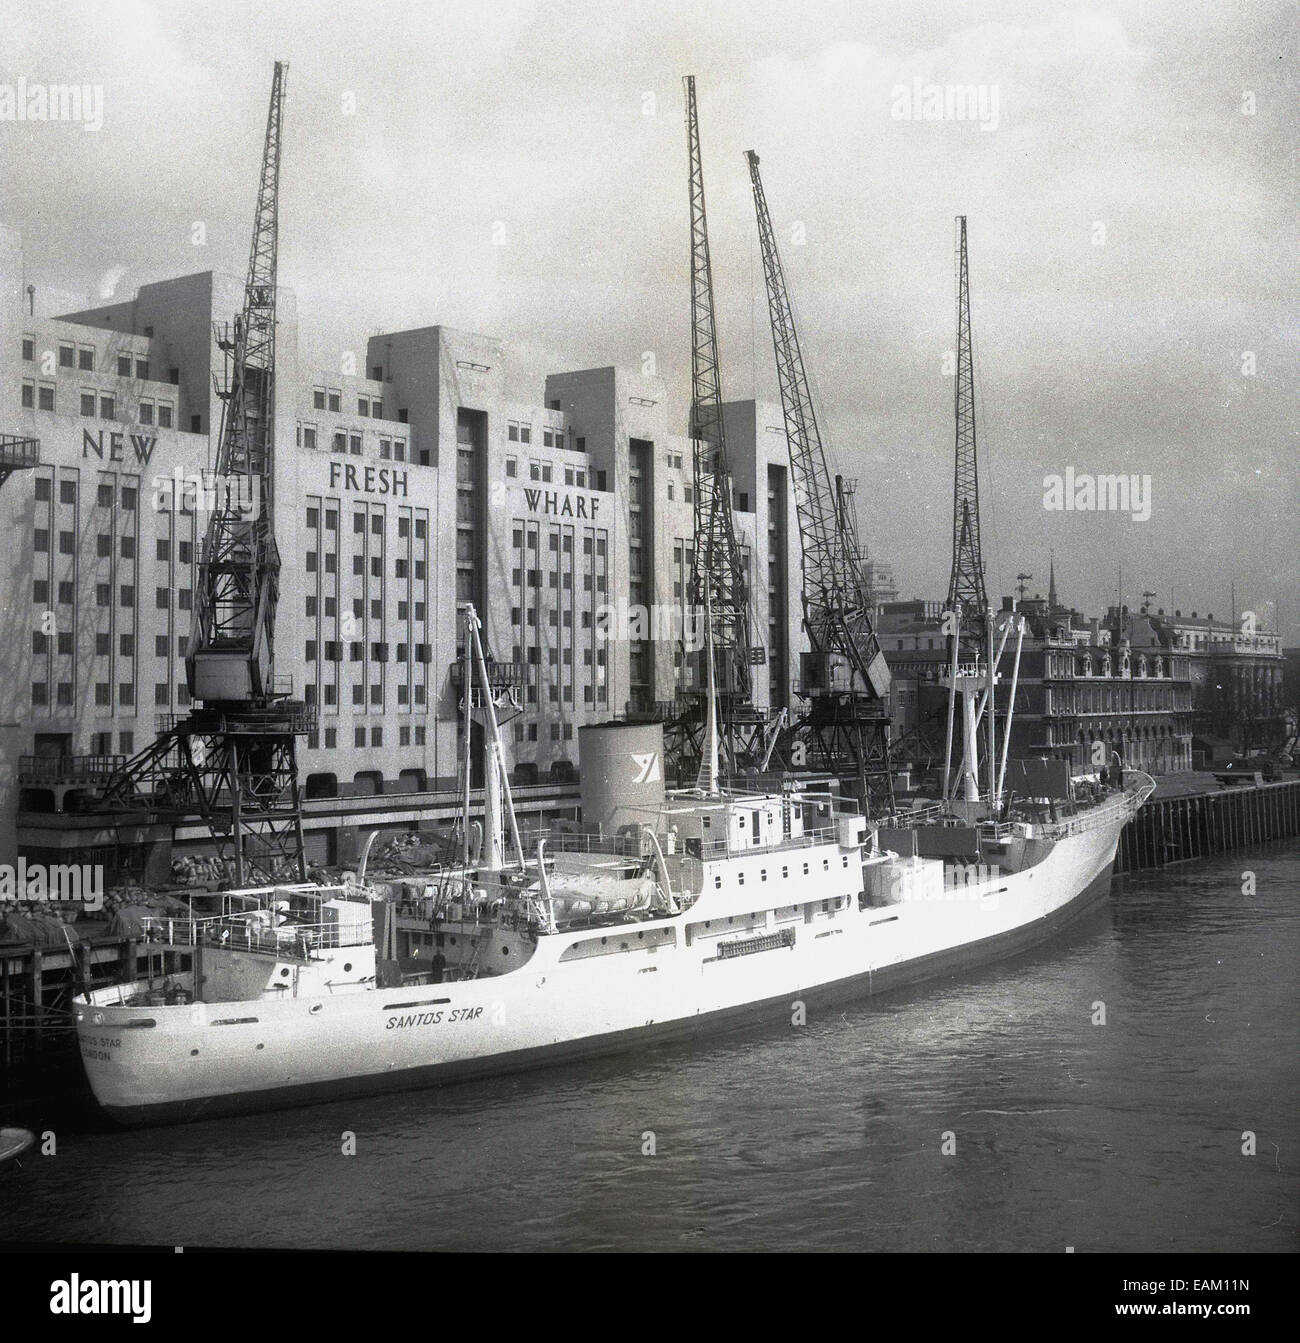 1960s, historical picture of freighter Stantos Star moored on river Thames at the New Fresh Wharf Company,  Docklands, London, England, UK. Stock Photo